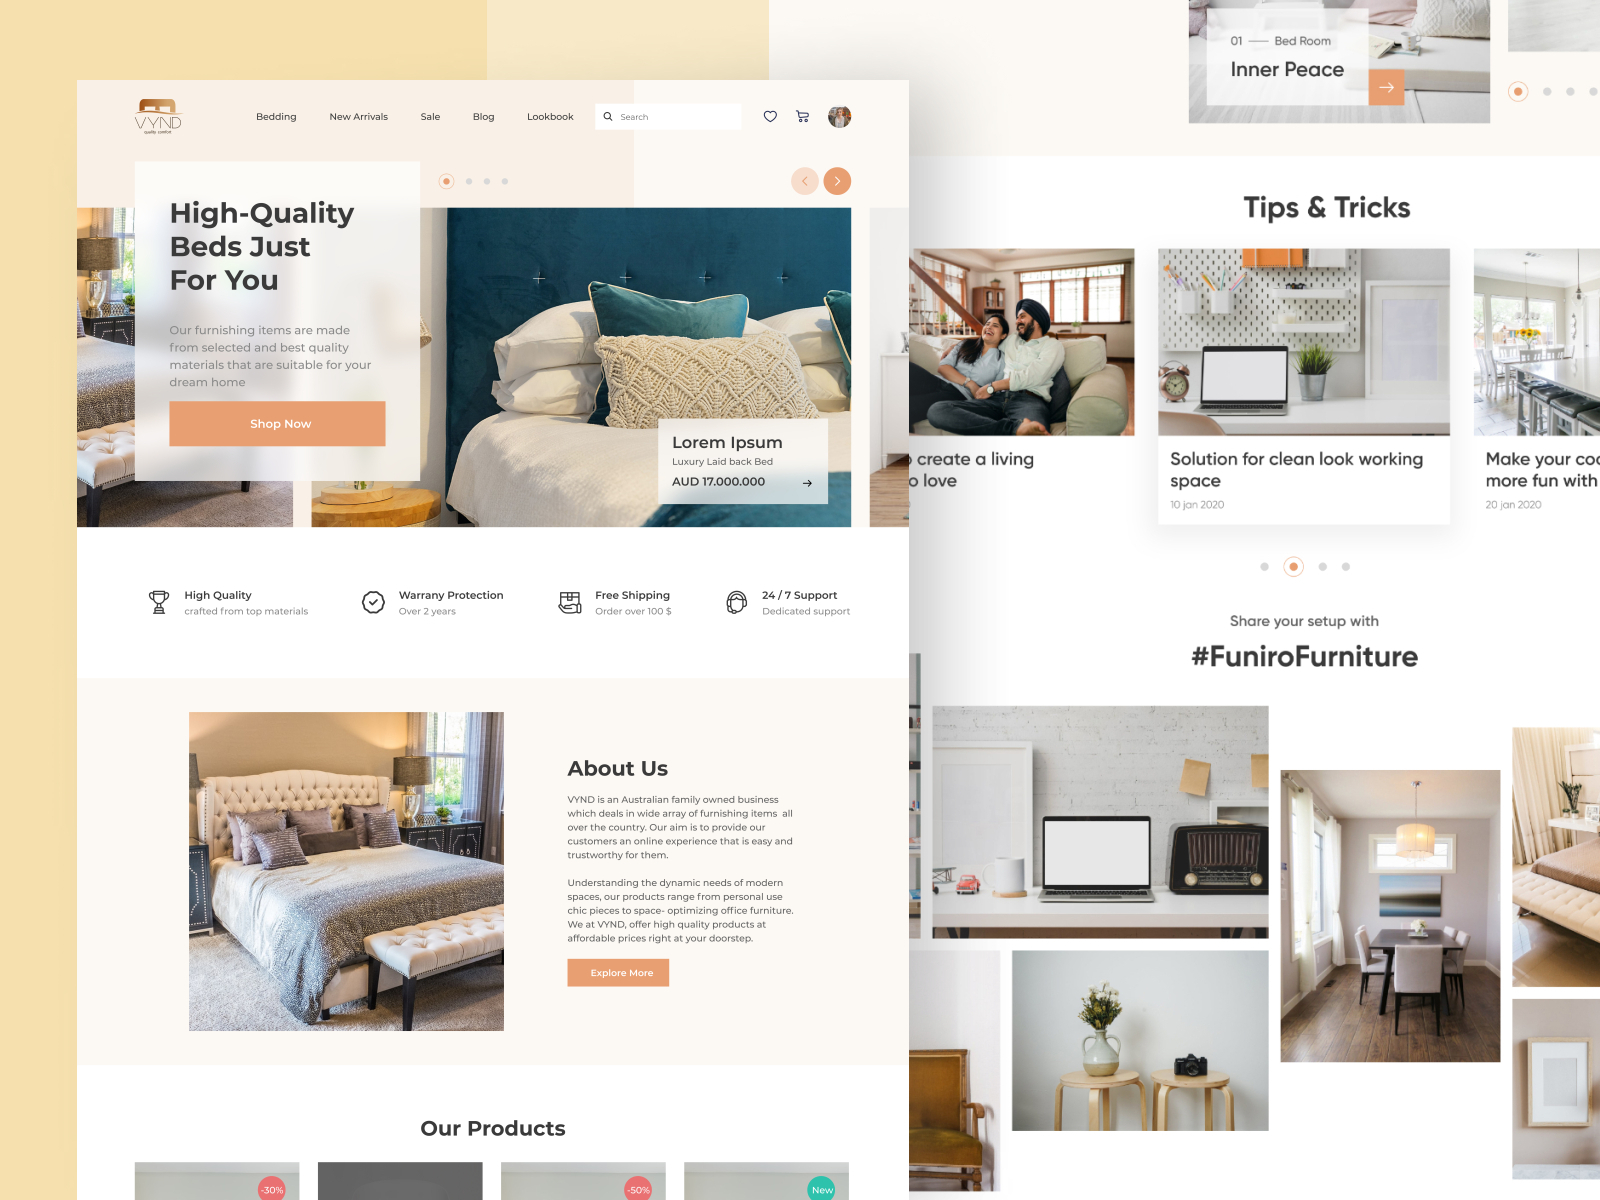 Online Furniture eCommerce Landing Page Design by Awais Ahmad on Dribbble